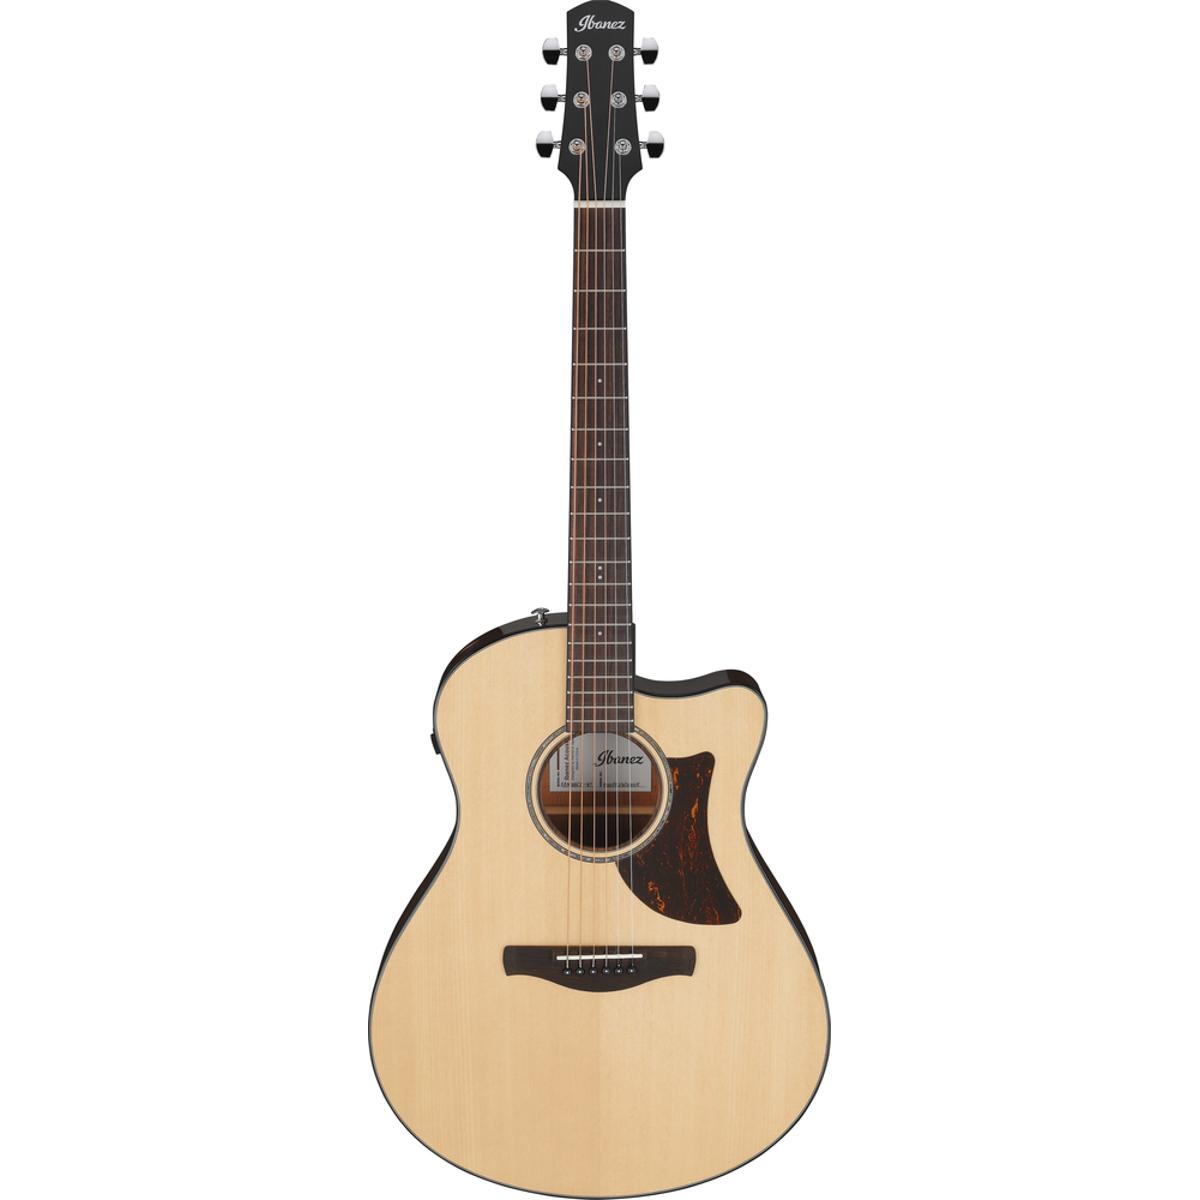 Ibanez-AAM300CE-Acoustic-Guitar-Natural-High-Gloss-w-Pickup-_-Cutaway